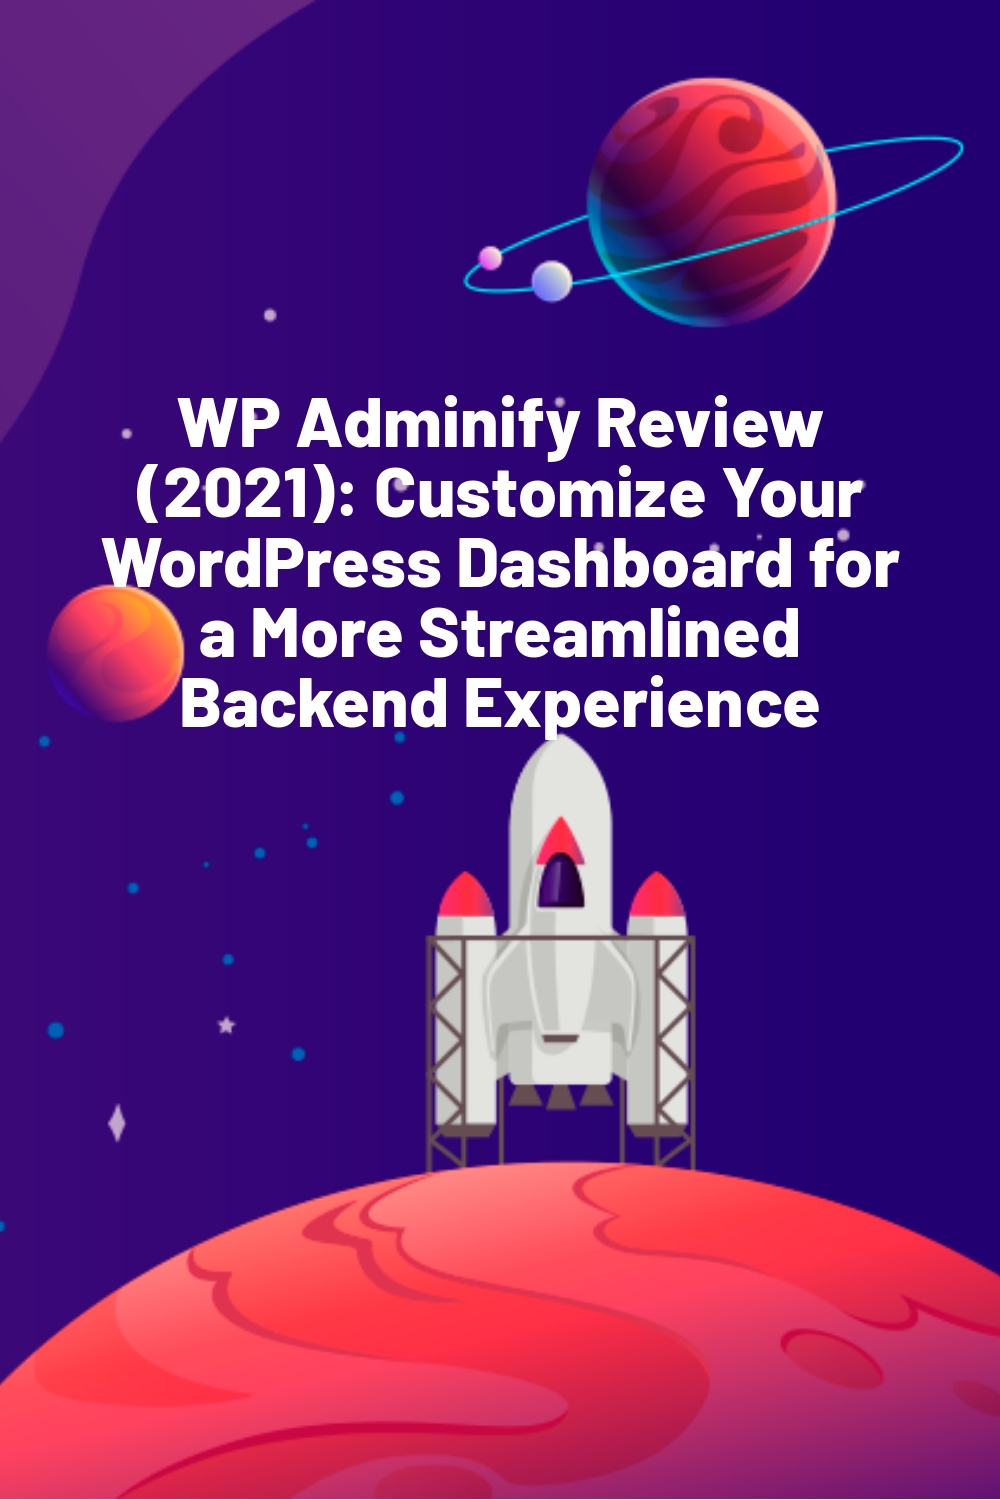 WP Adminify Review (2021): Customize Your WordPress Dashboard for a More Streamlined Backend Experience